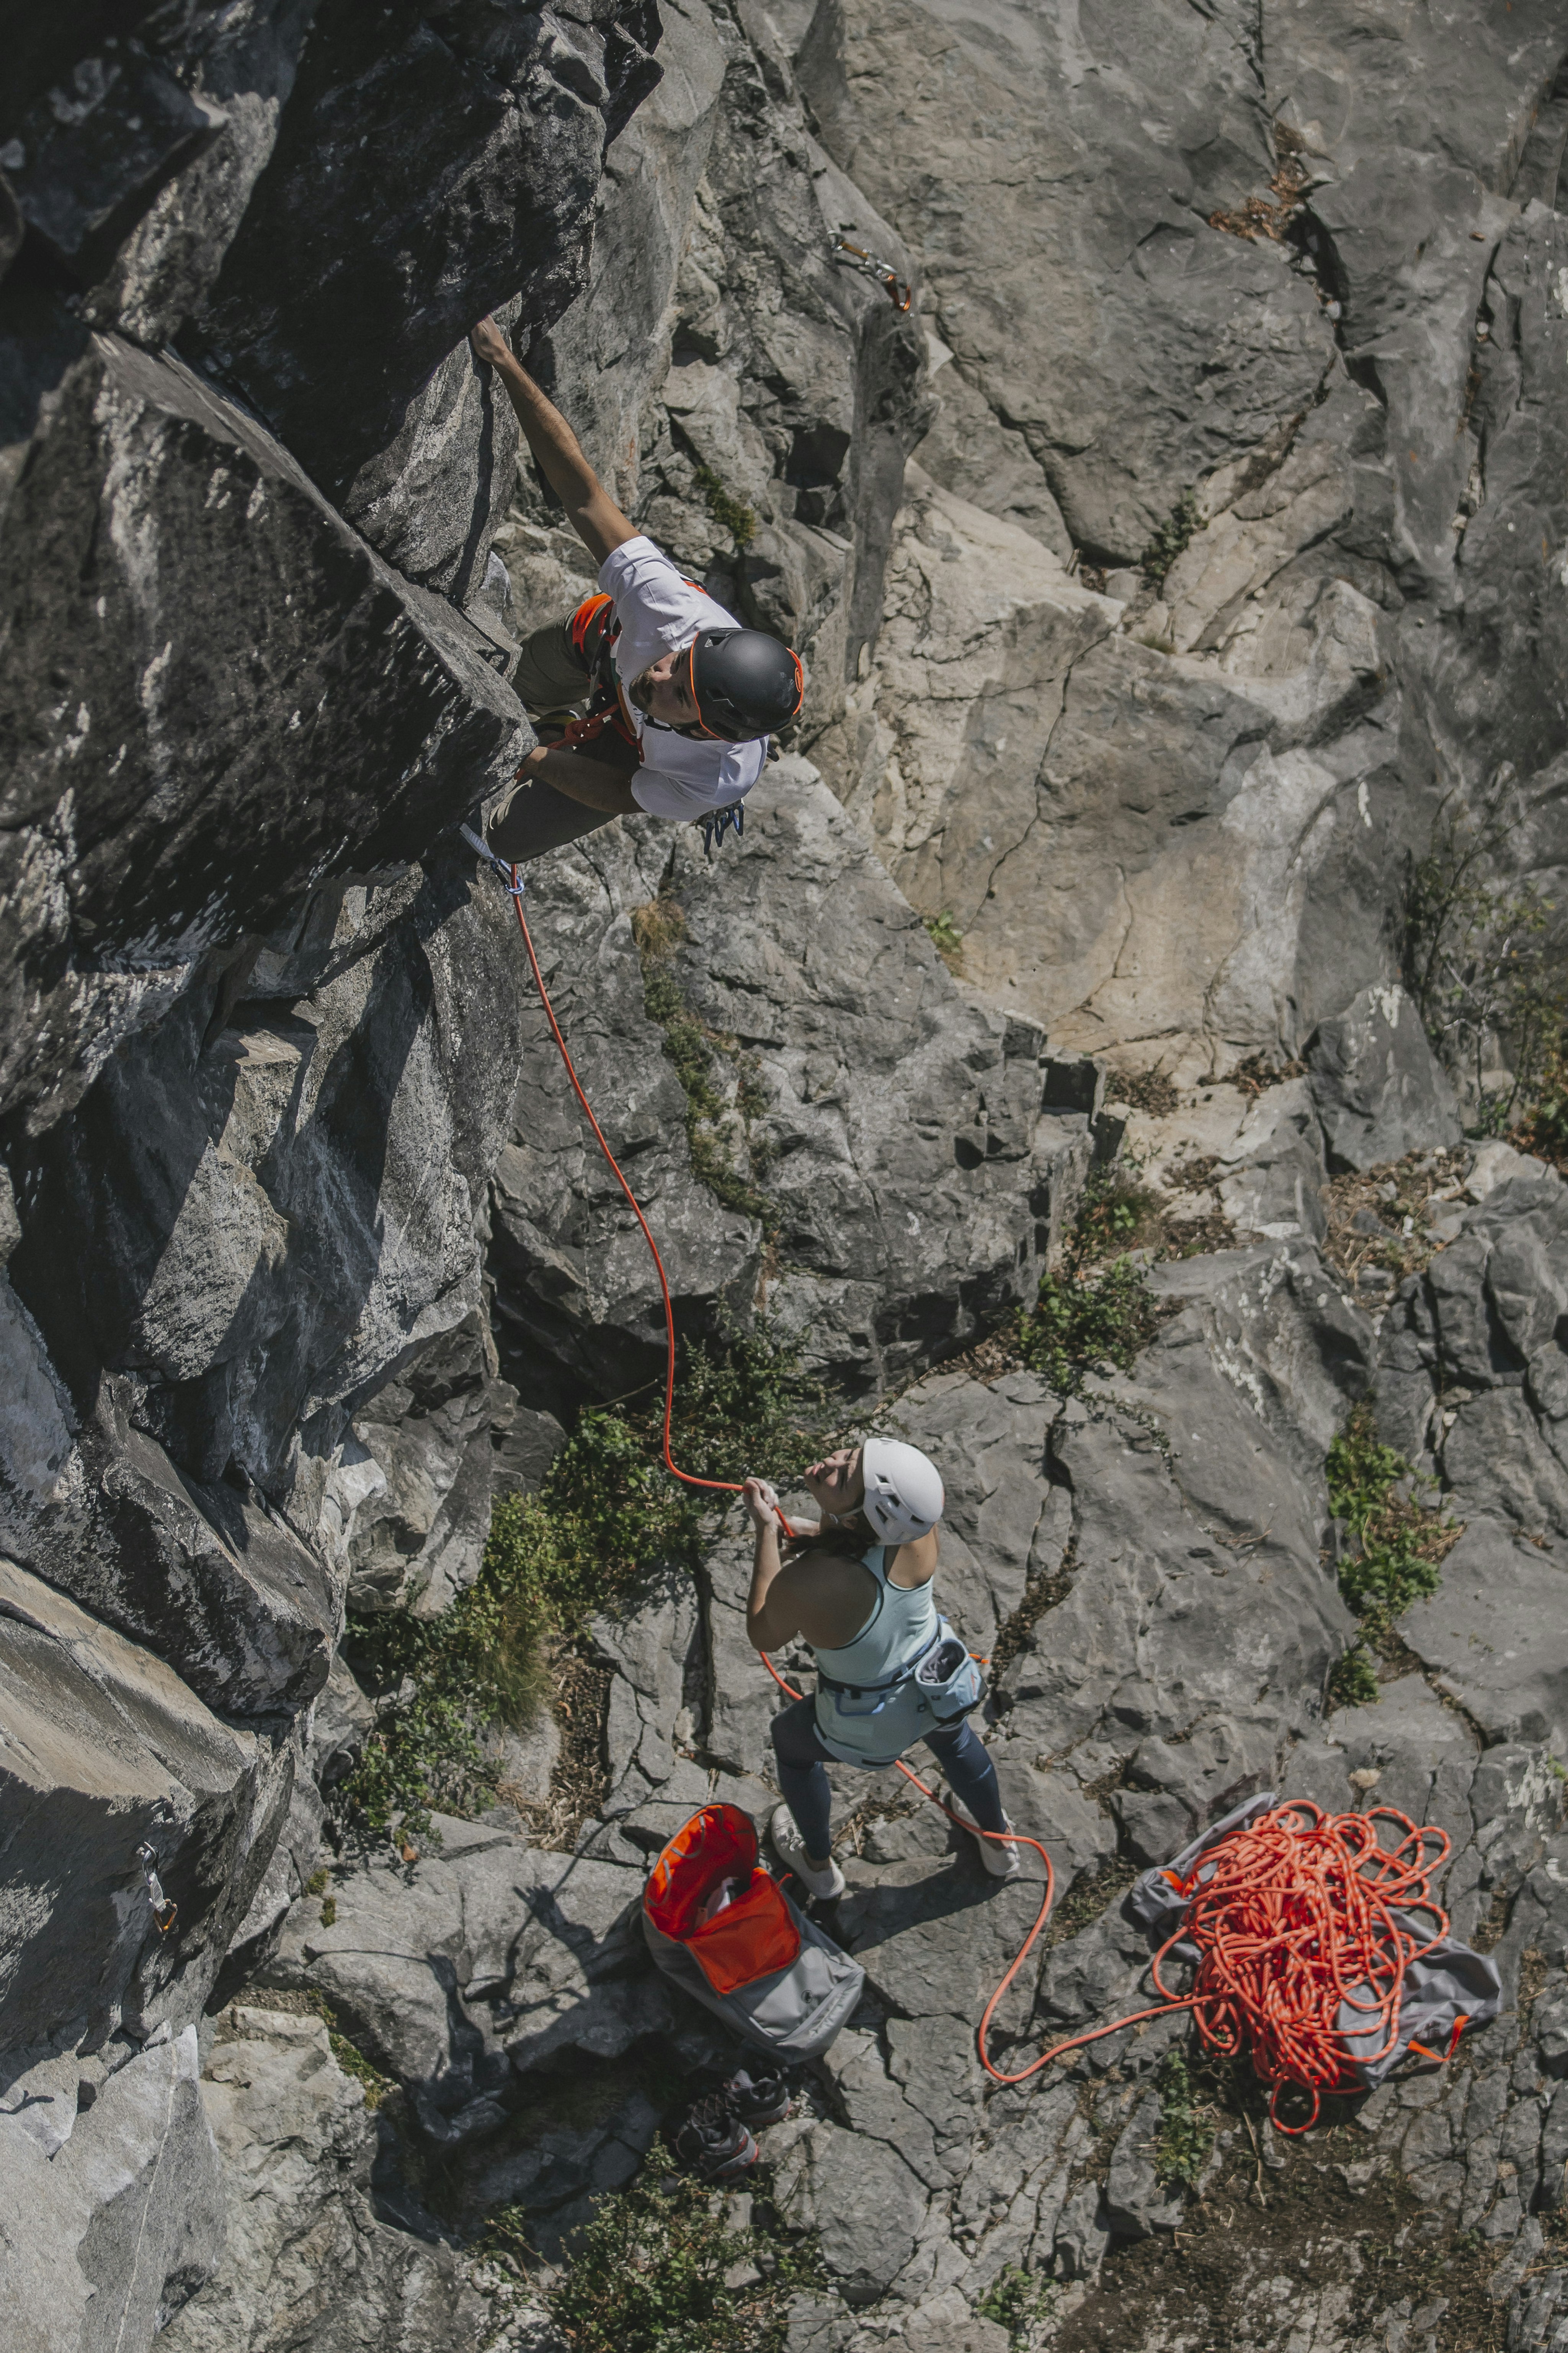 Man and woman climbing on a rock wall